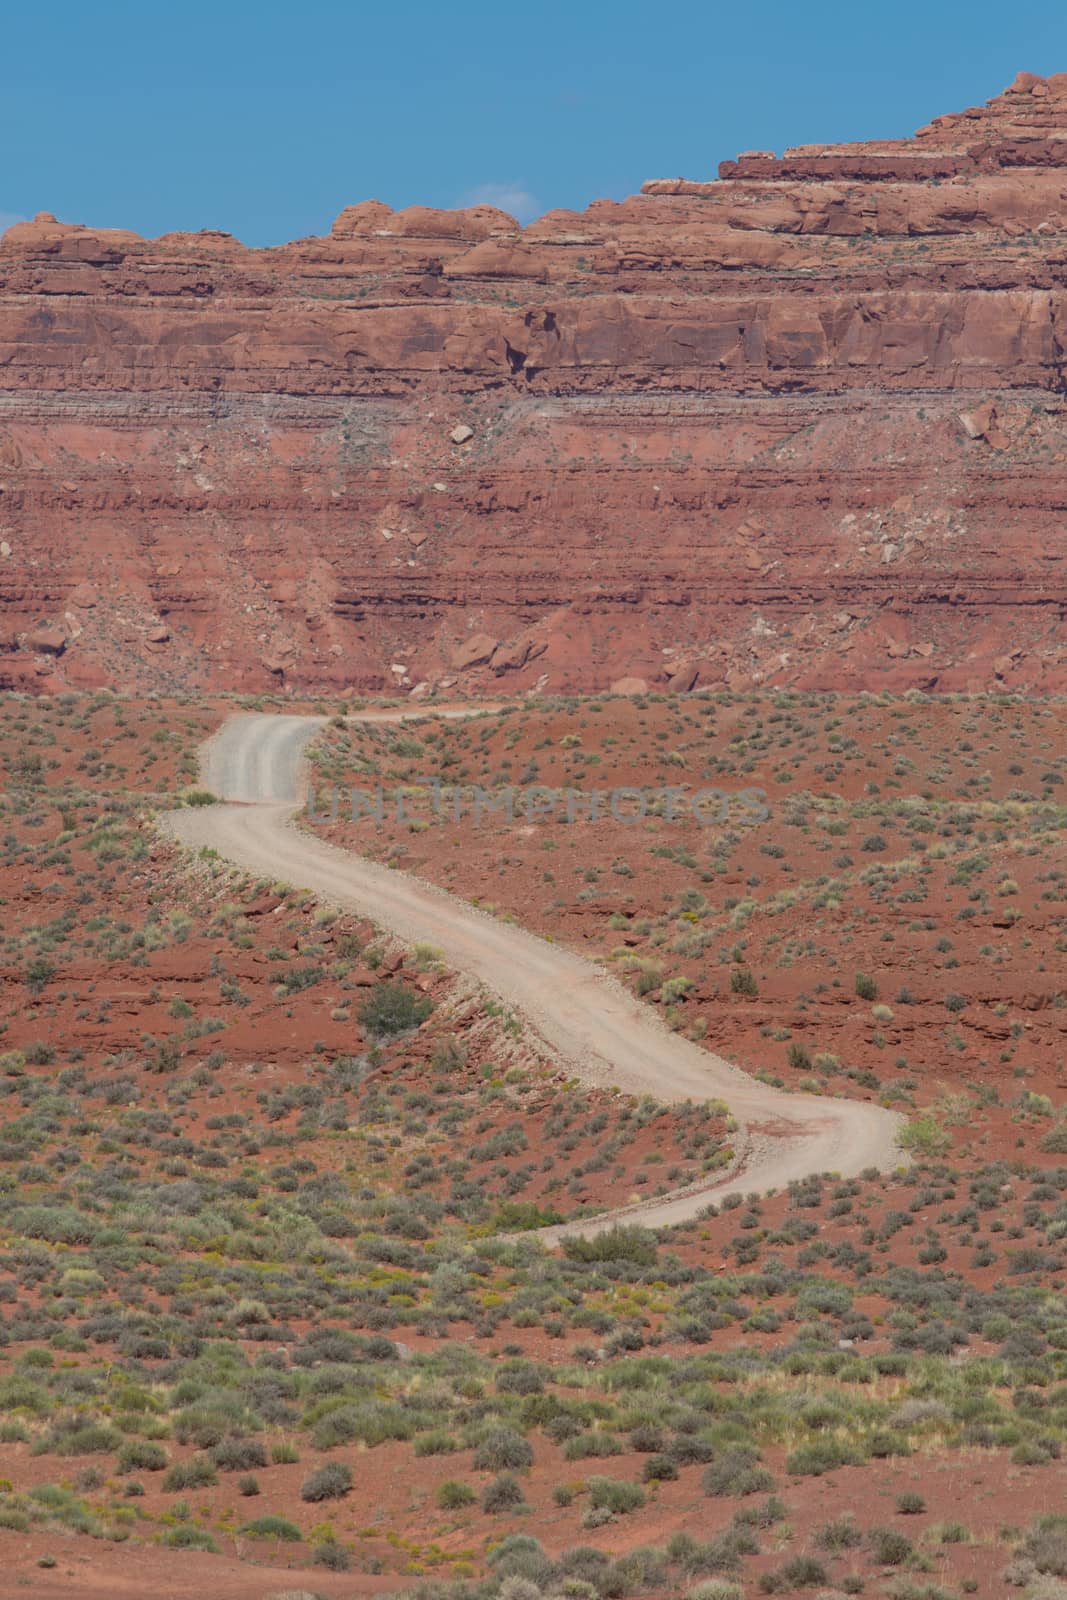 A trail winds through the desert landscape in Valley of the Gods.